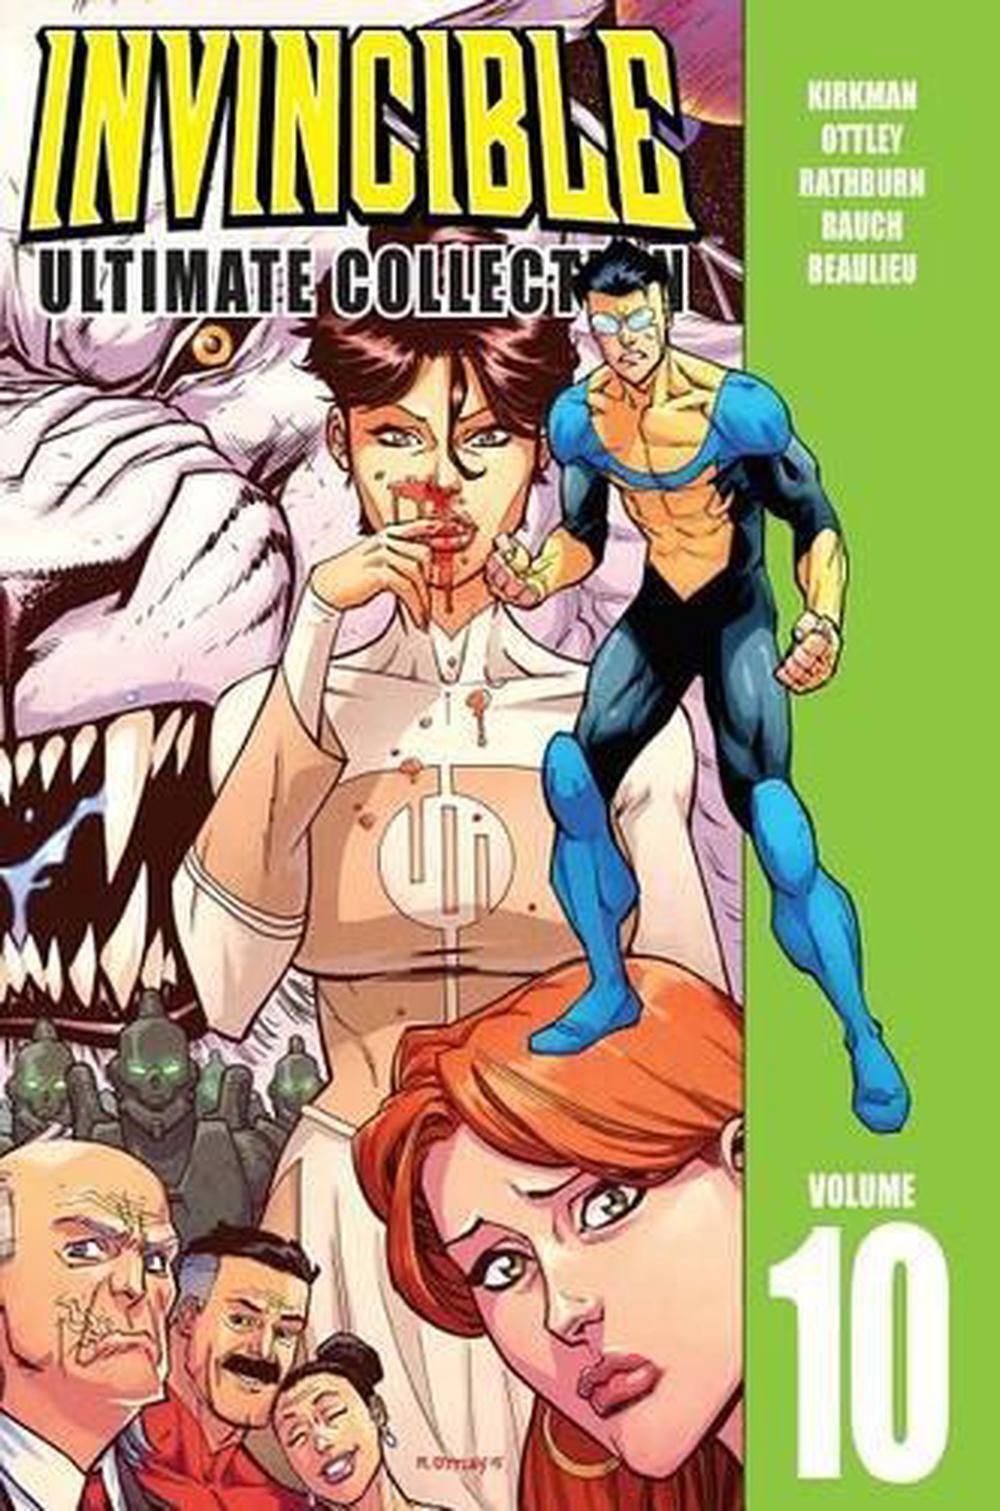 Invincible: The Ultimate Collection Volume 10 by Robert Kirkman (English) Hardco